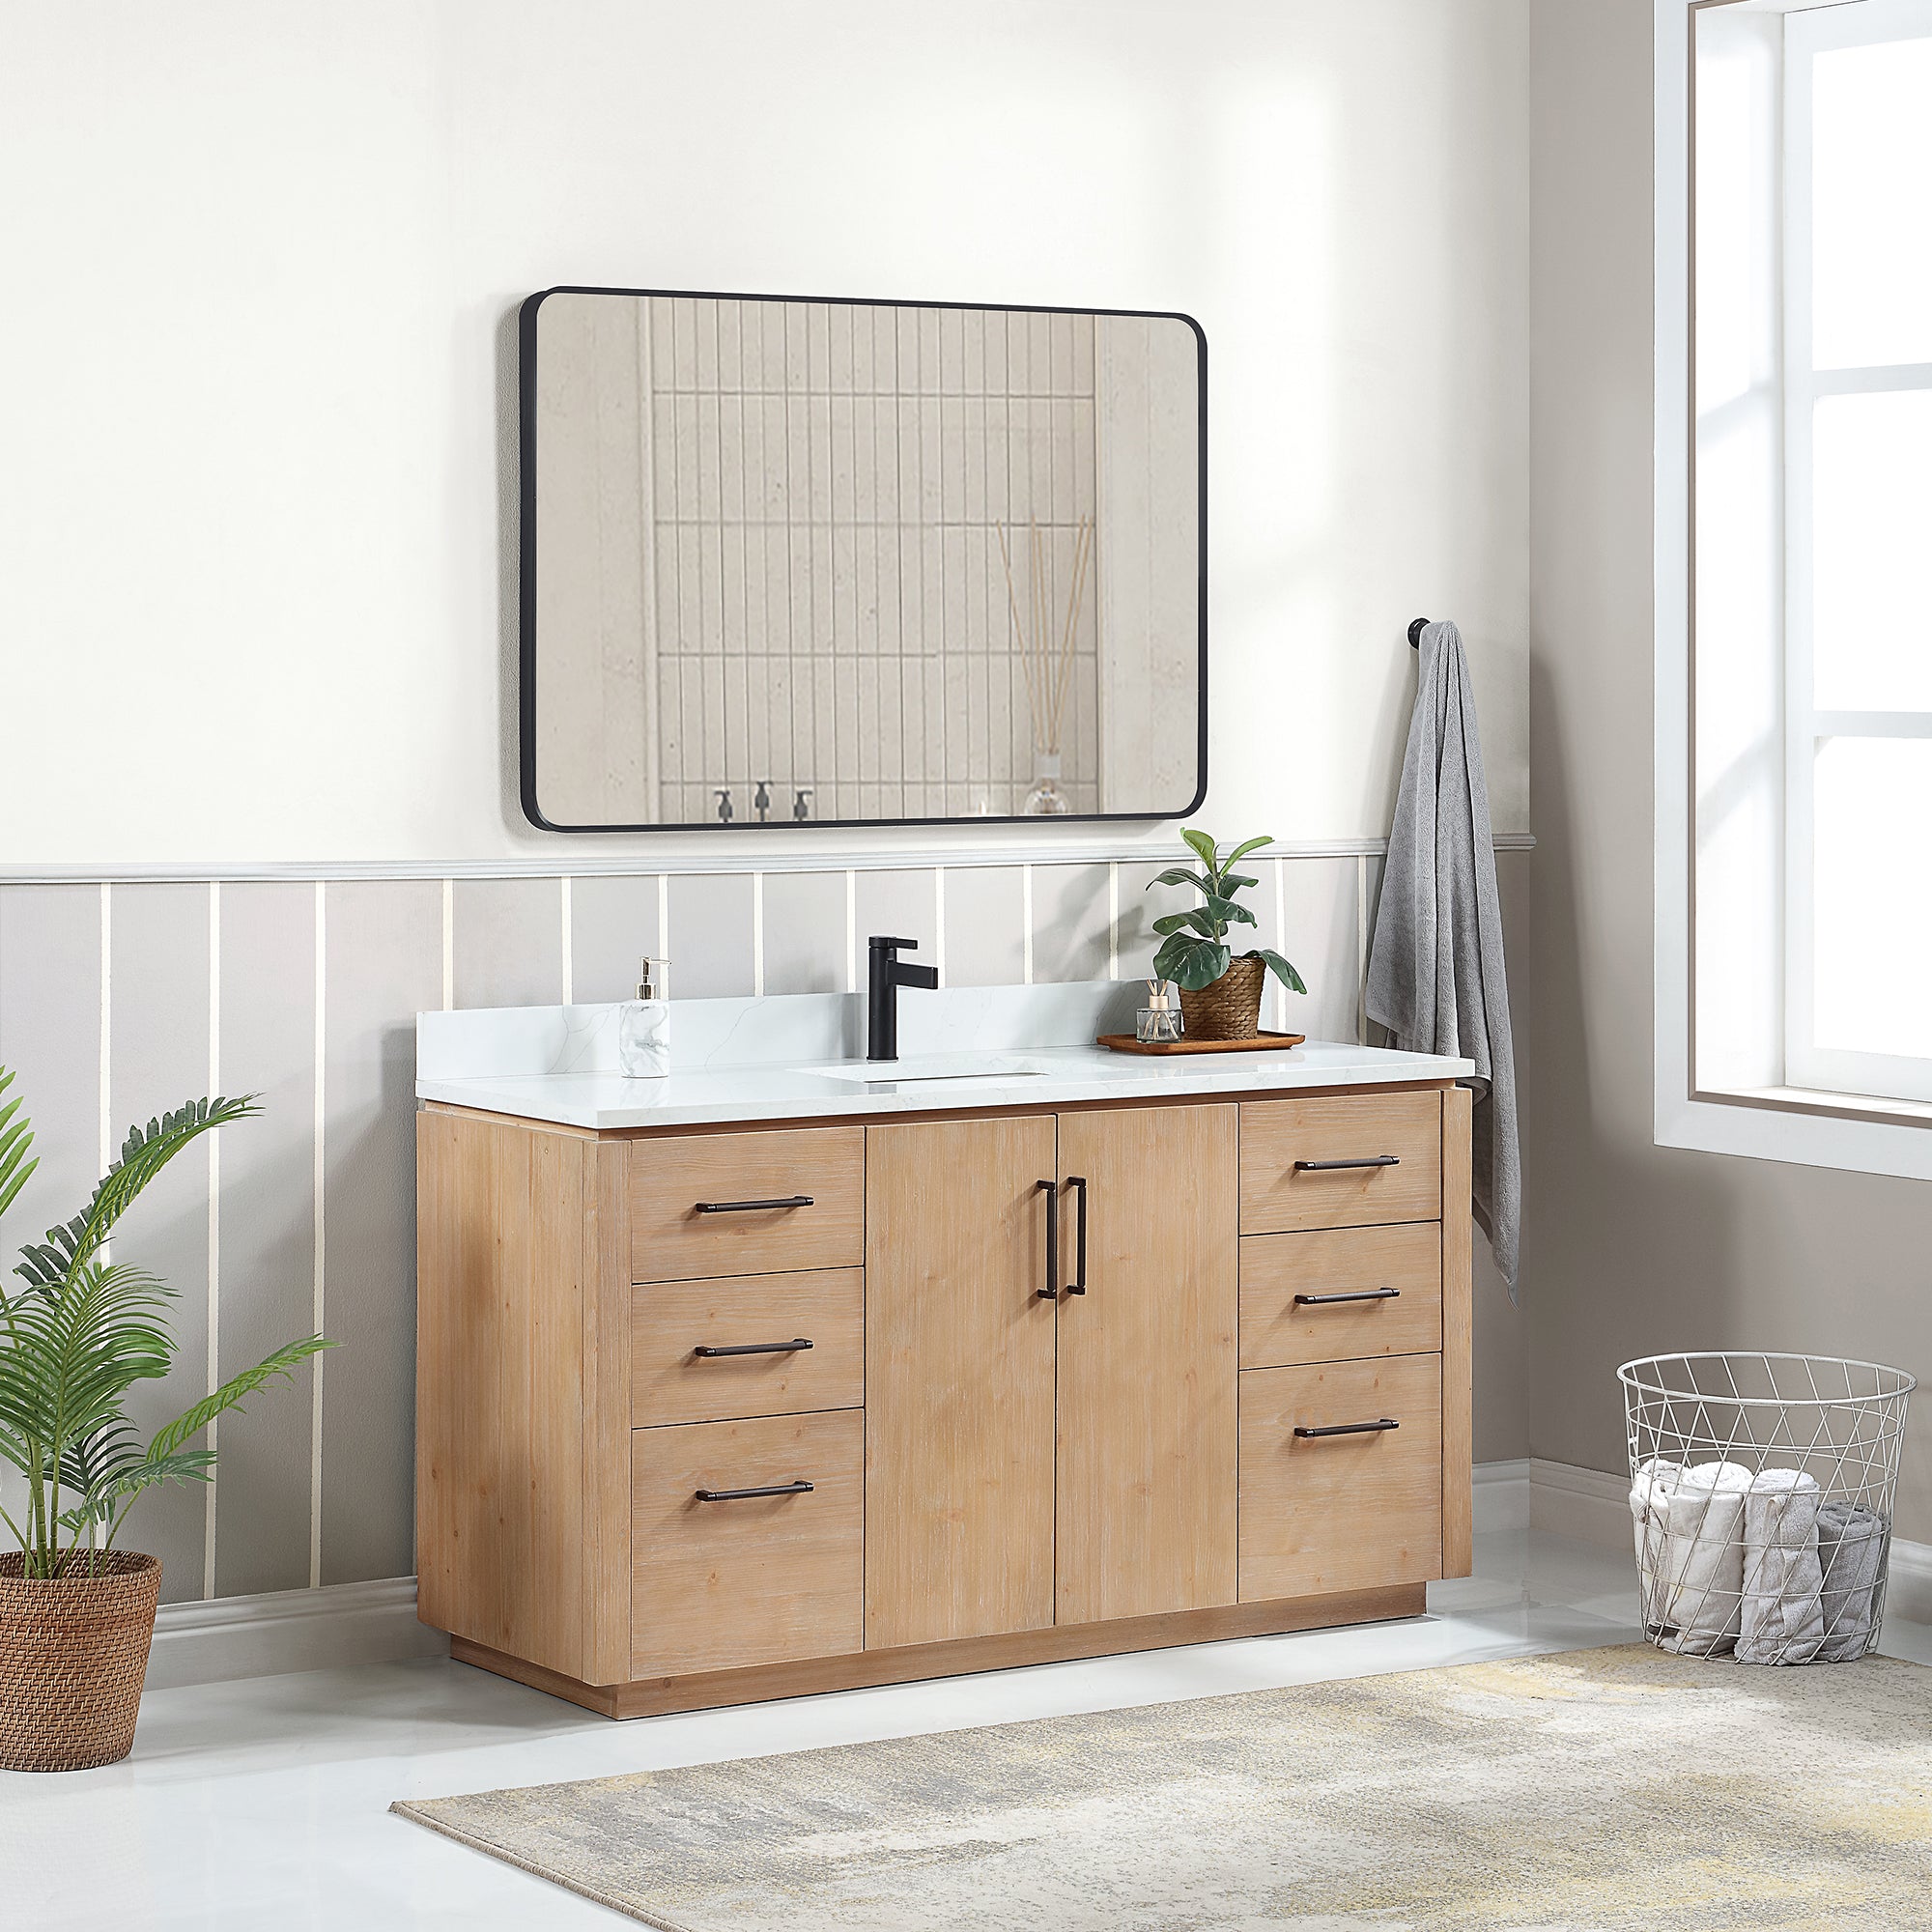 San 60" Free-standing Single Bath Vanity in Fir Wood Brown with White Grain Composite Stone Top